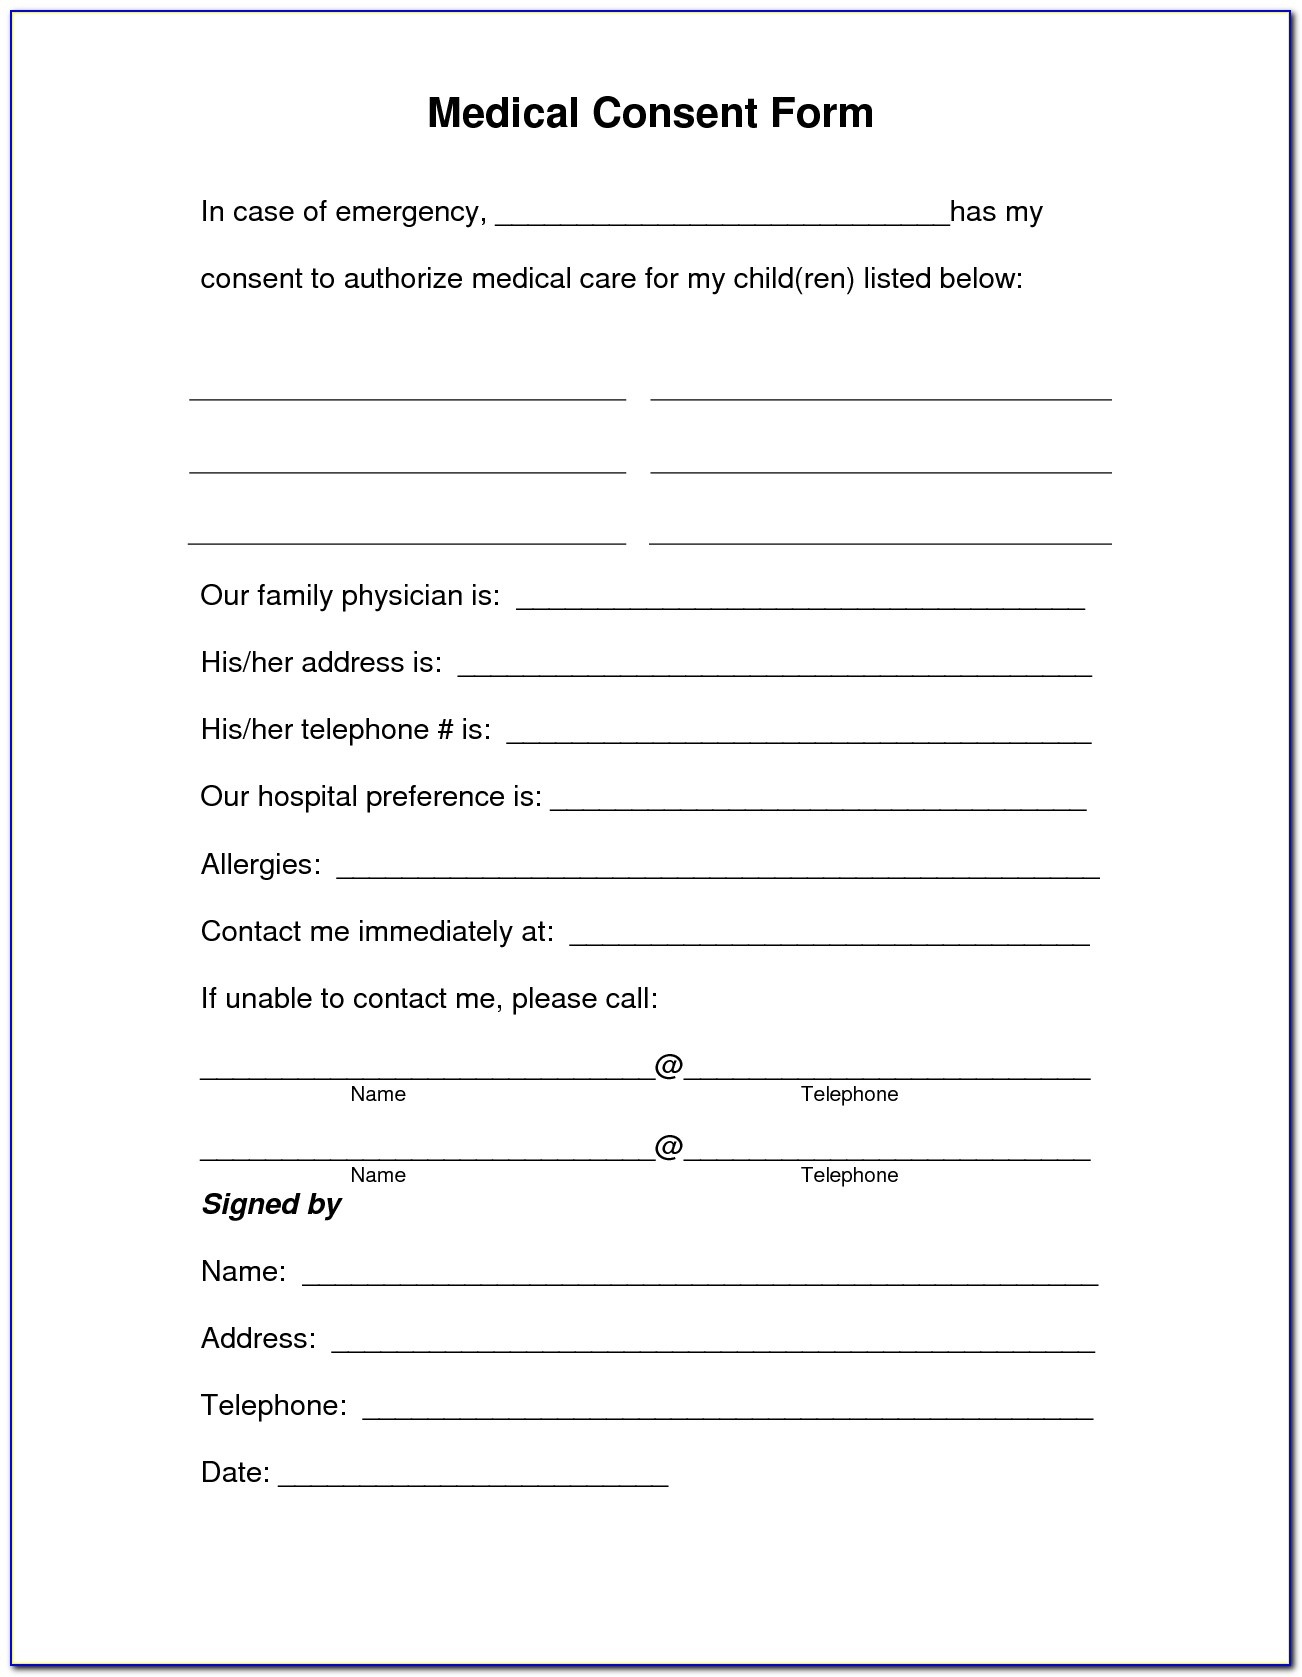 Free Child Medical Consent Form Template - Form : Resume Examples - Free Printable Medical Consent Form